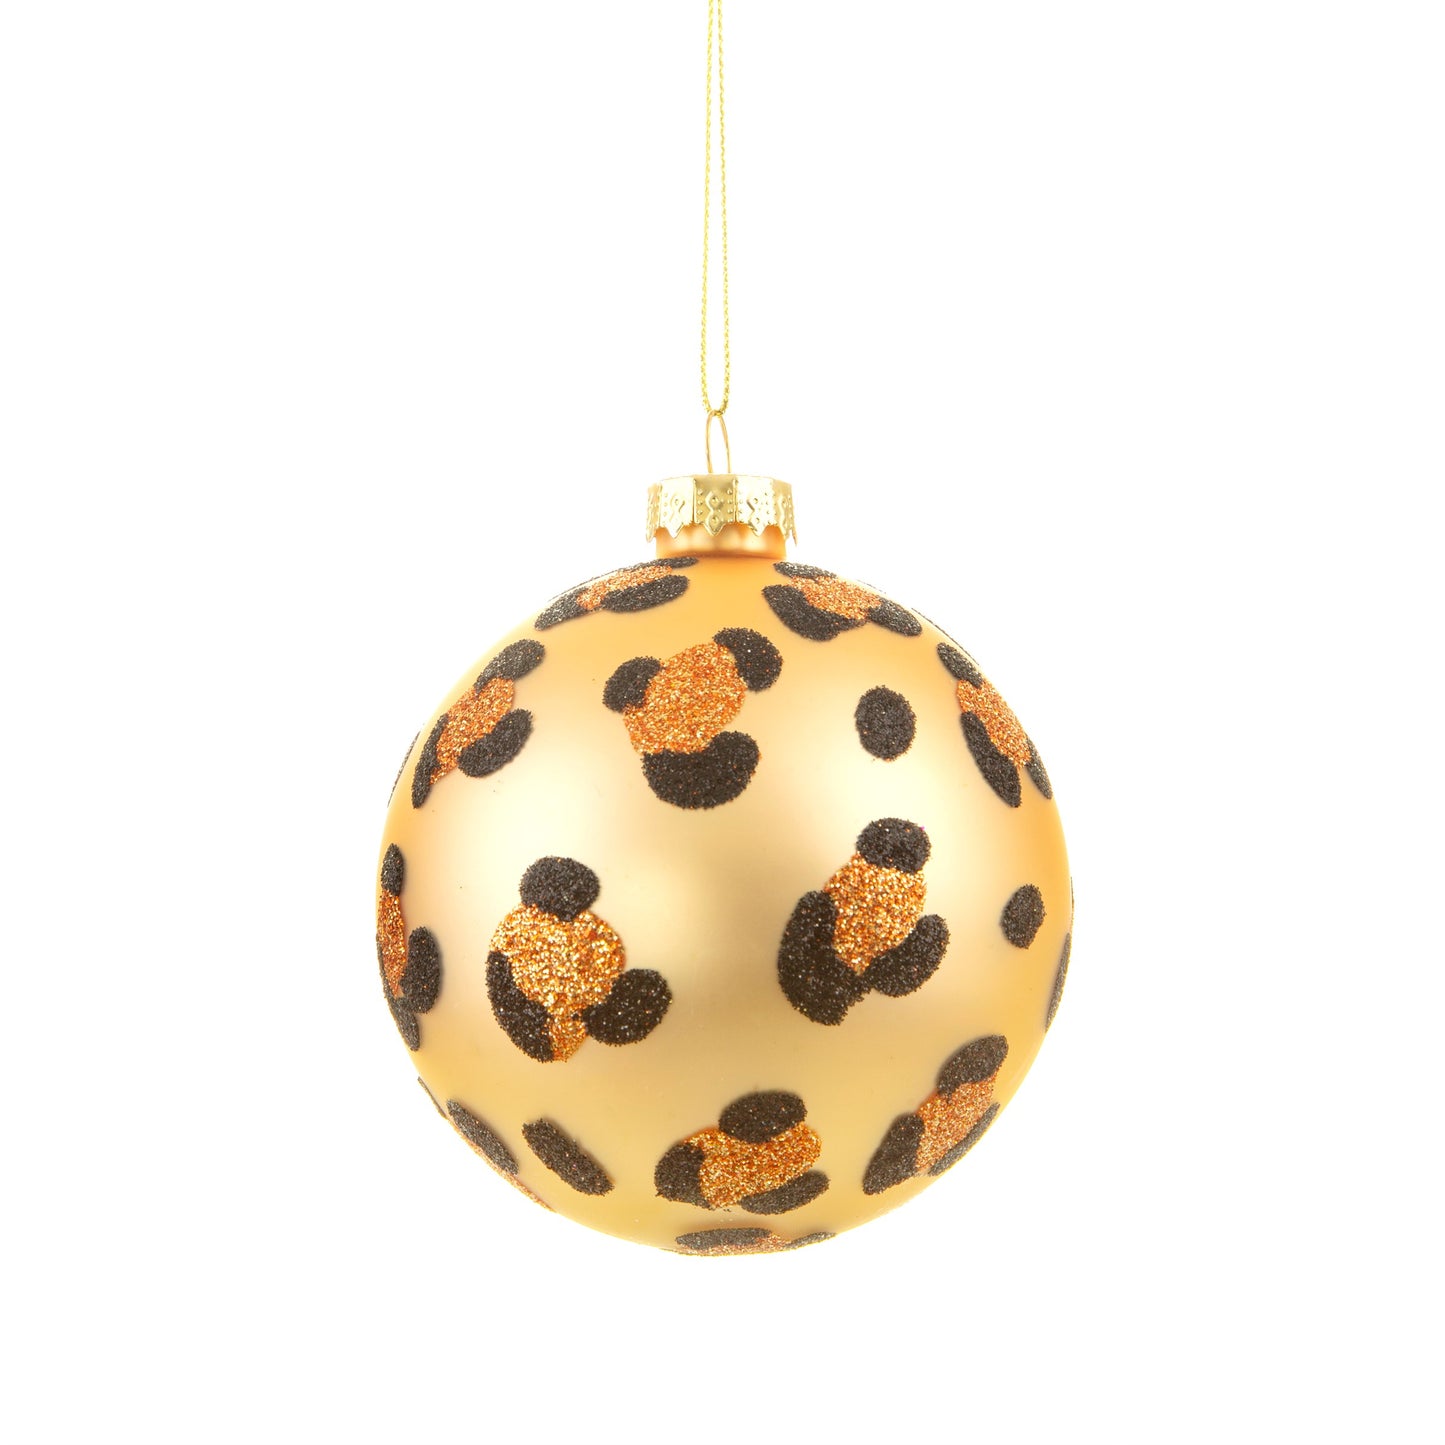 Release your wild side this Christmas!! These gorgeous Leopard print baubles with glitter detail are stunning for a black and gold theme or mixed in with other designs.